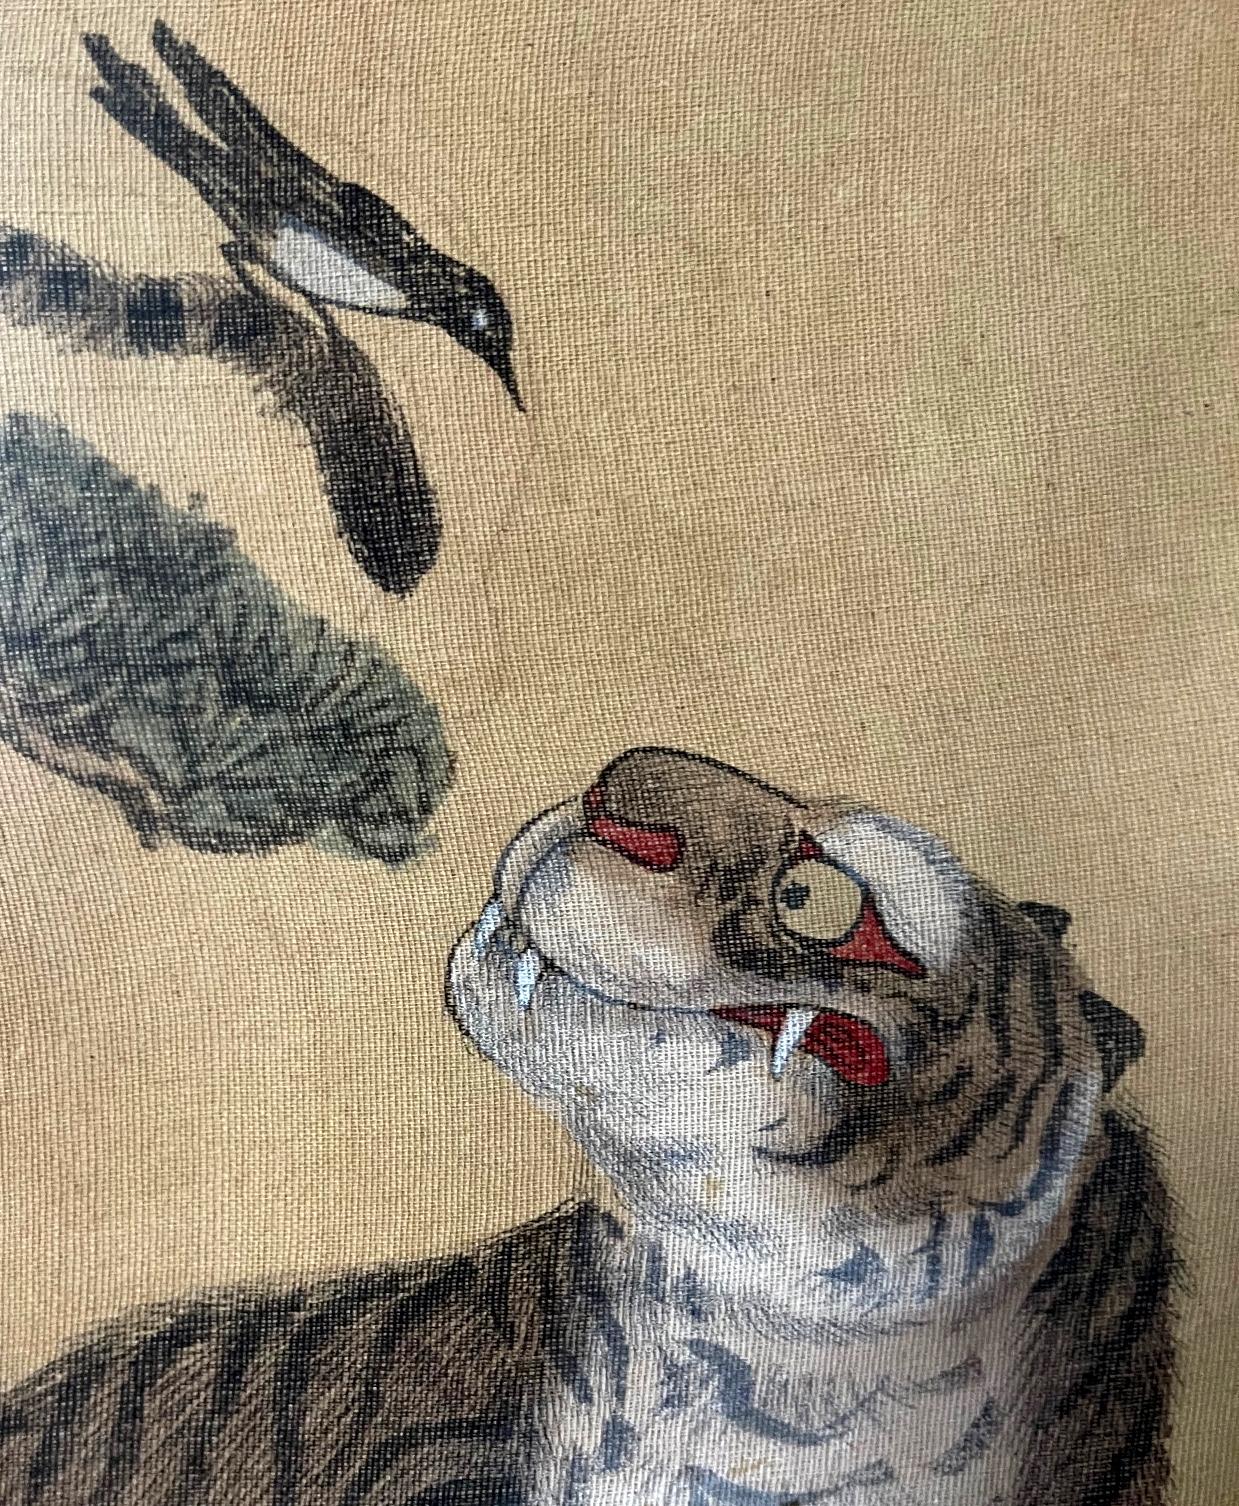 Framed Korean Jakhodo Tiger and Magpie Folk Painting One of Four 2